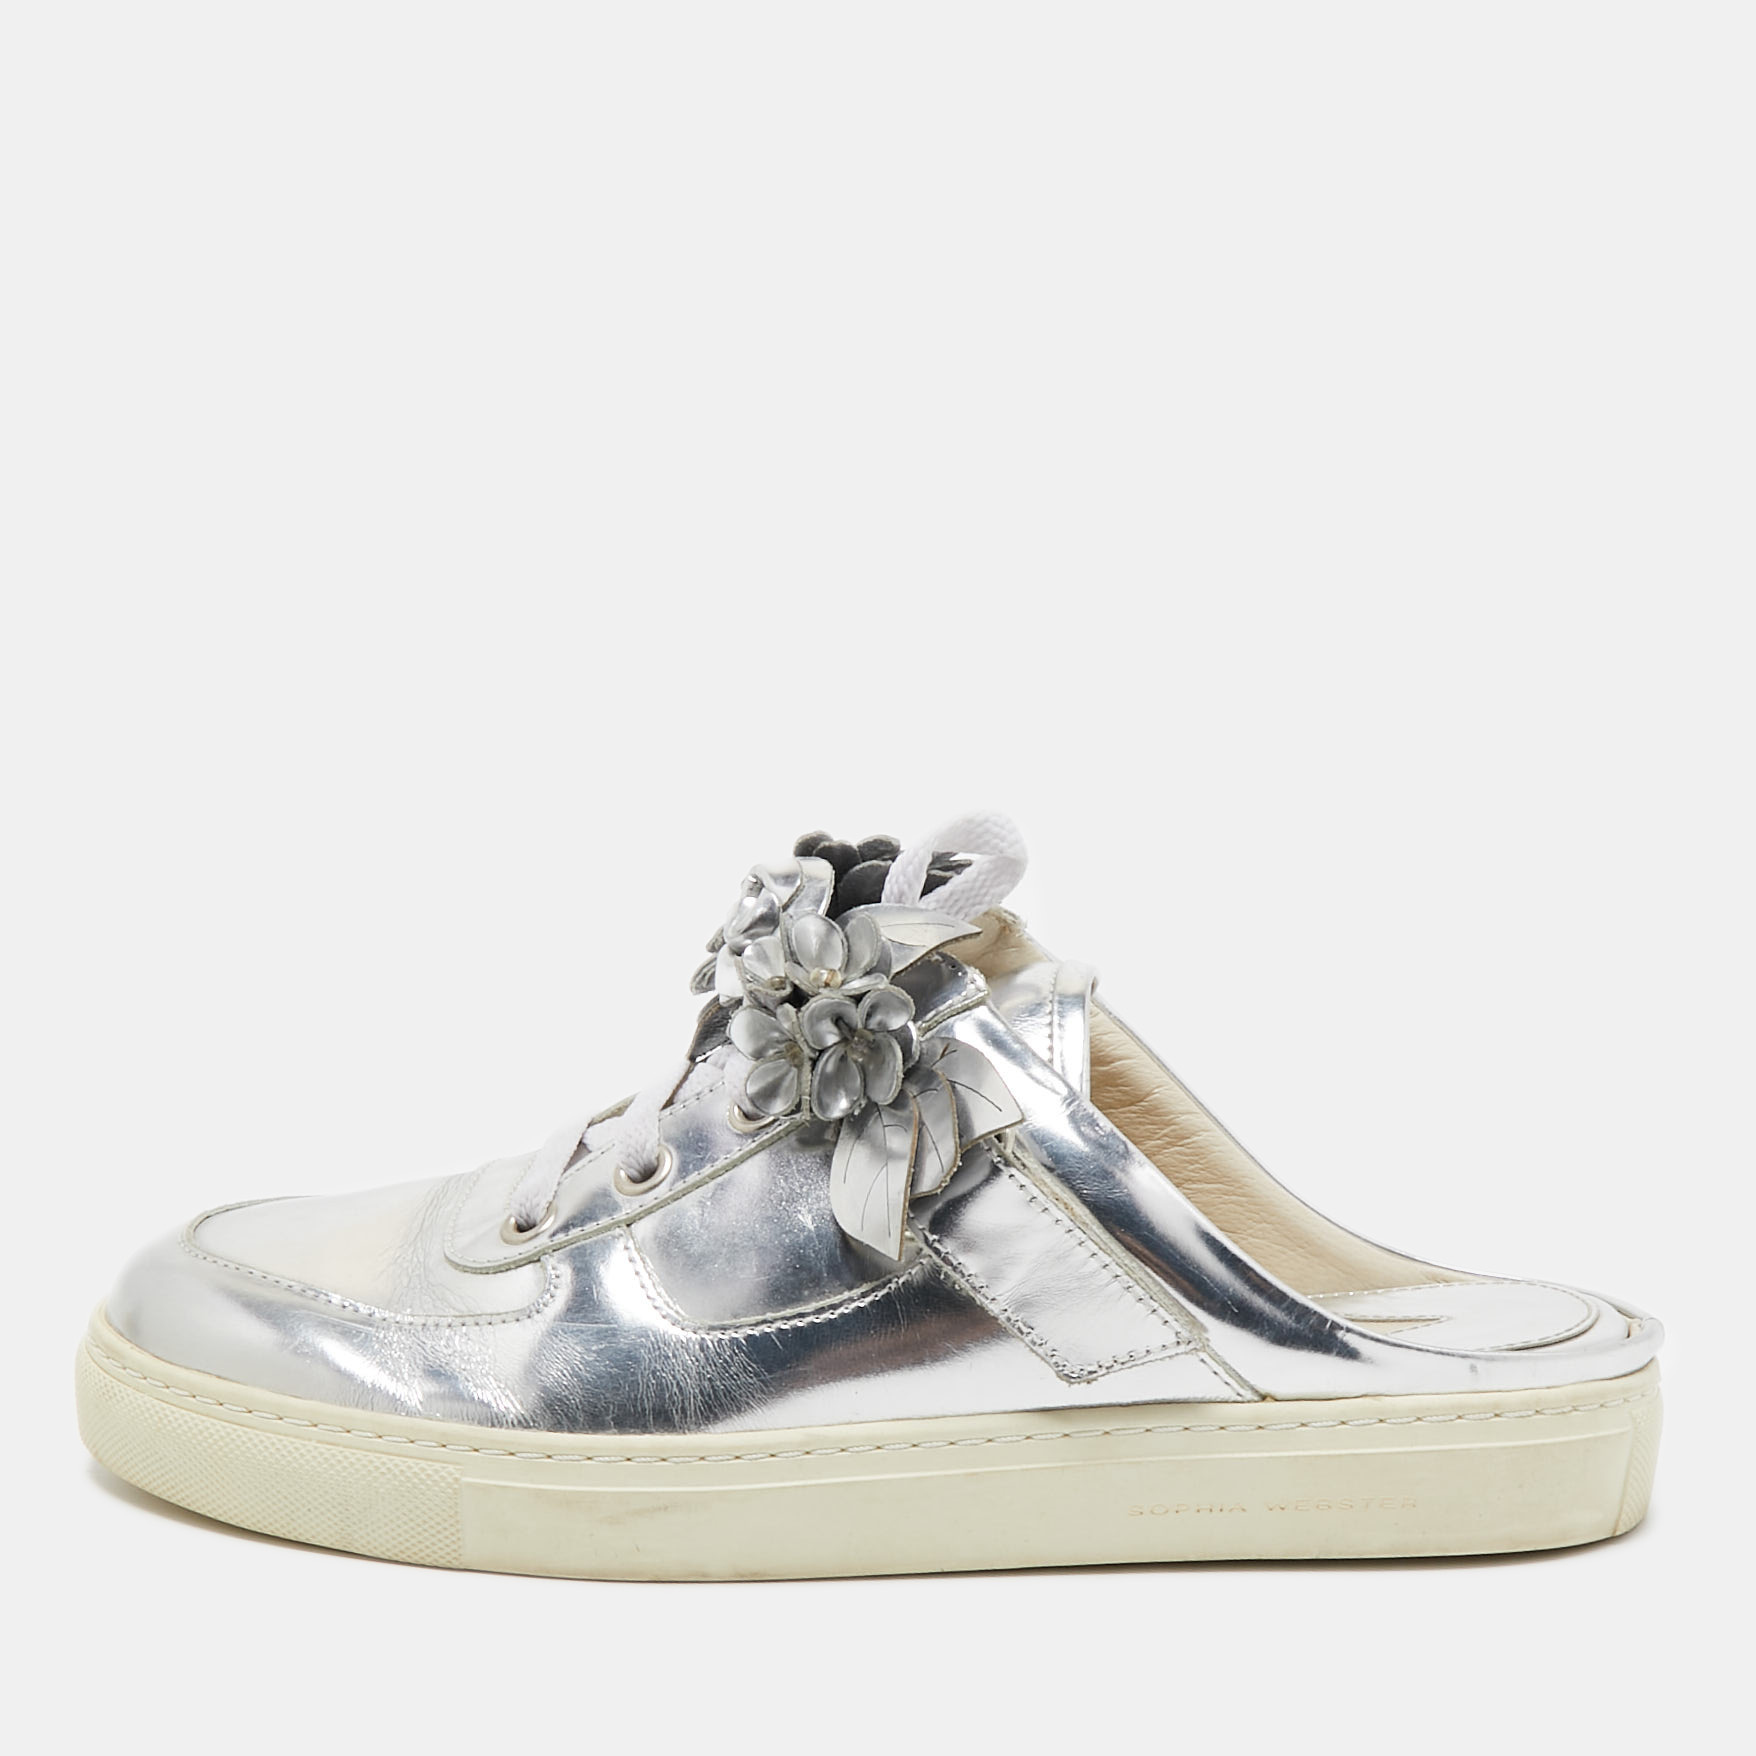 Pre-owned Sophia Webster Silver Leather Lilico Jessie Sneaker Mules Size 38